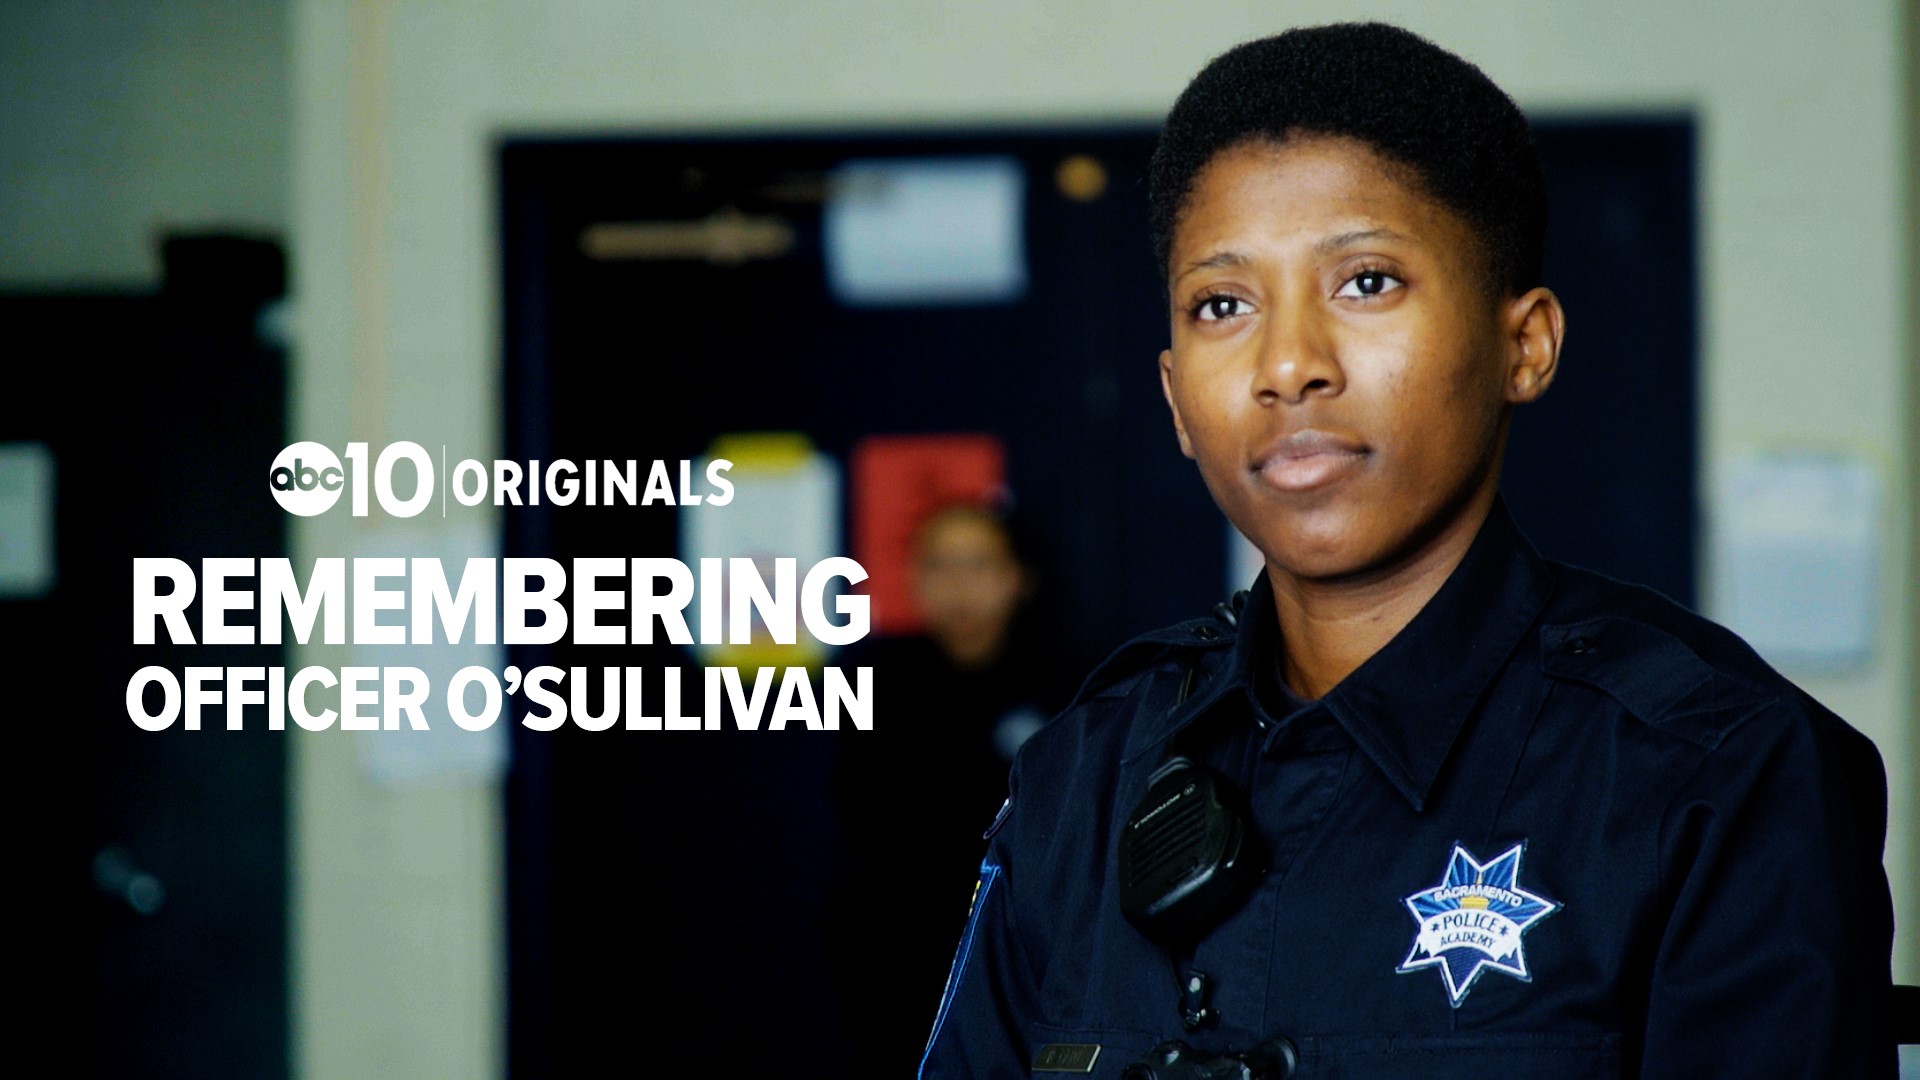 They only met a few times, but they shared an innate bond: two young women who decided to join Sacramento law enforcement and serve their community.